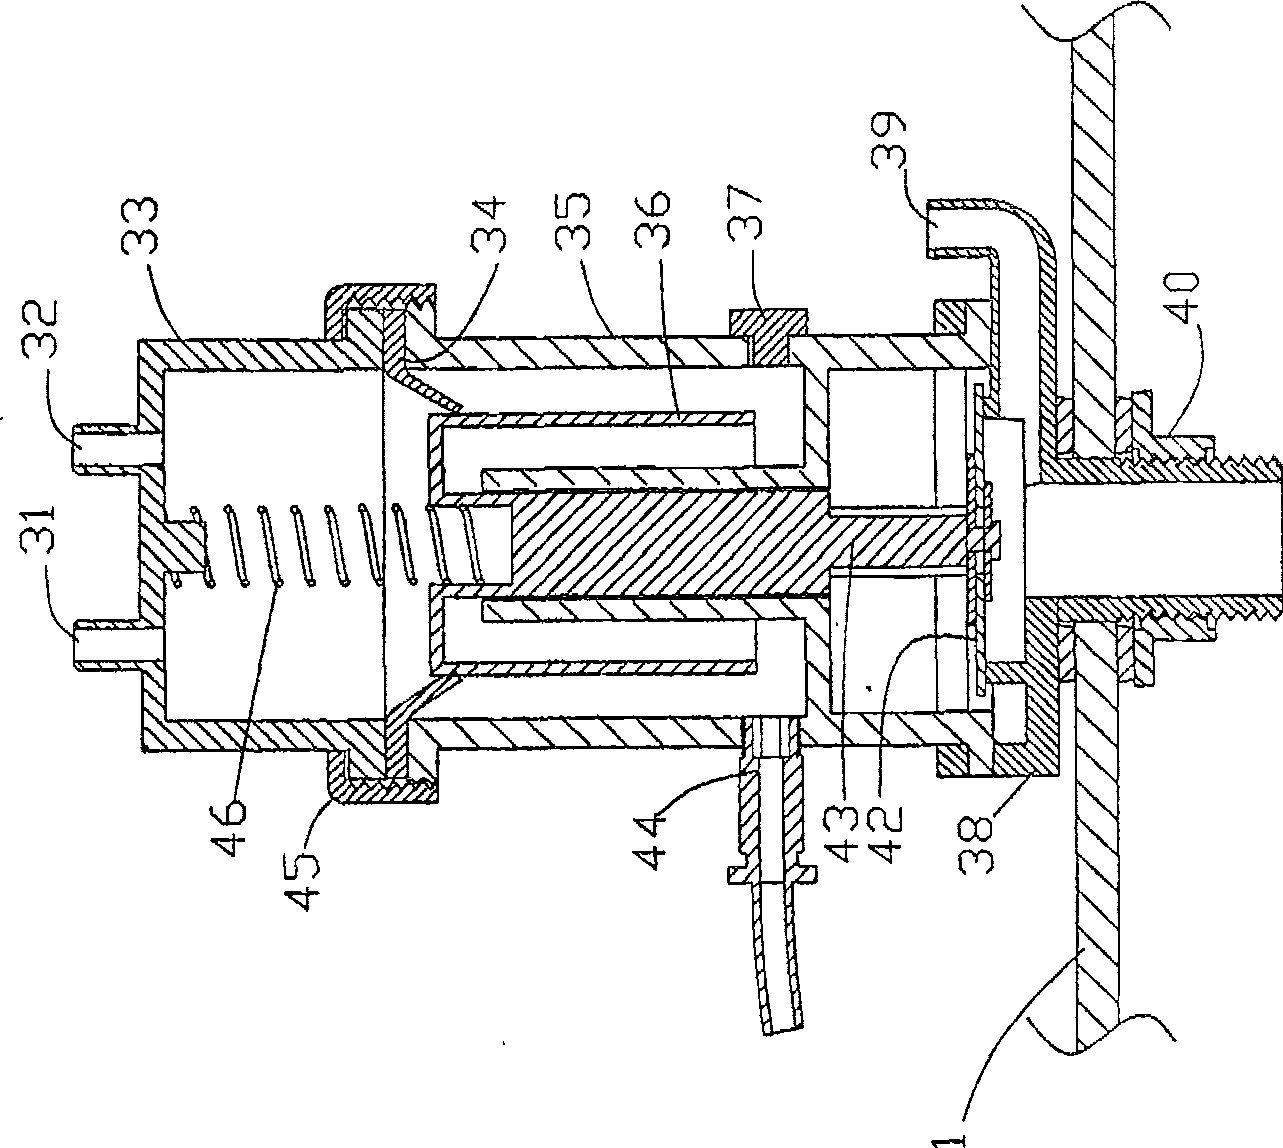 Low position neutral water recovery and utilizing device matched with toilet